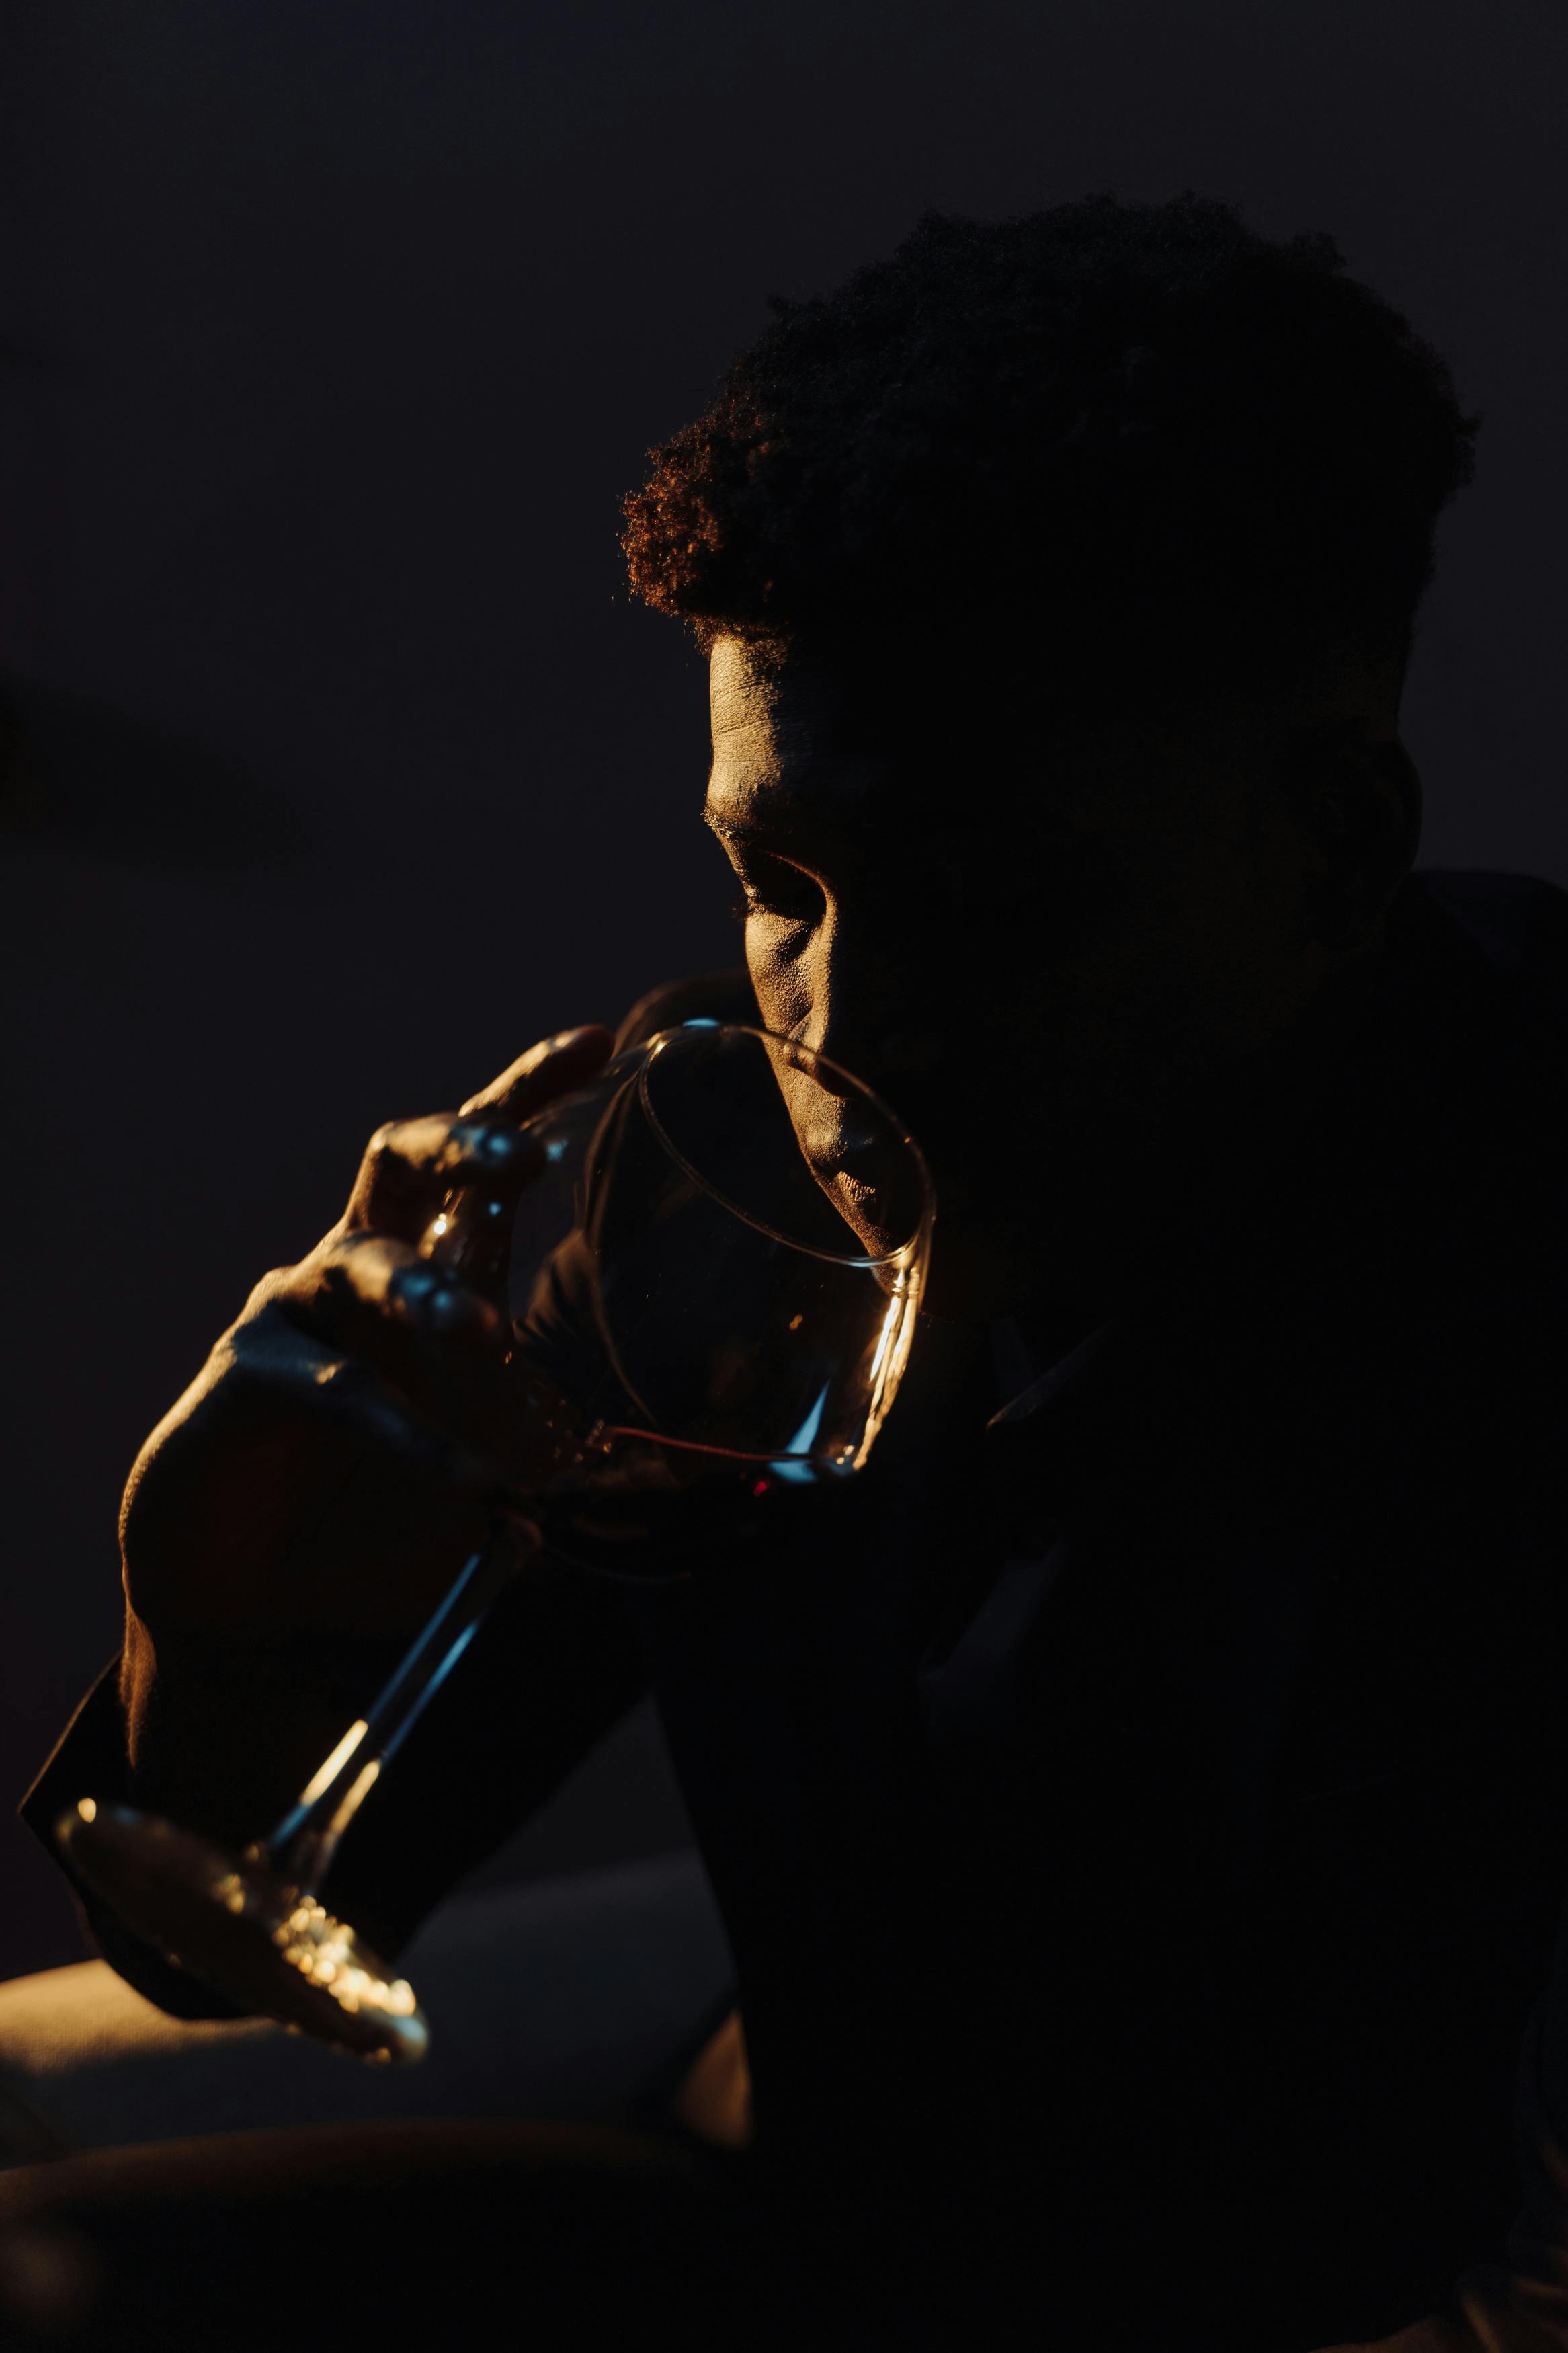 A man drinking wine | Source: Pexels